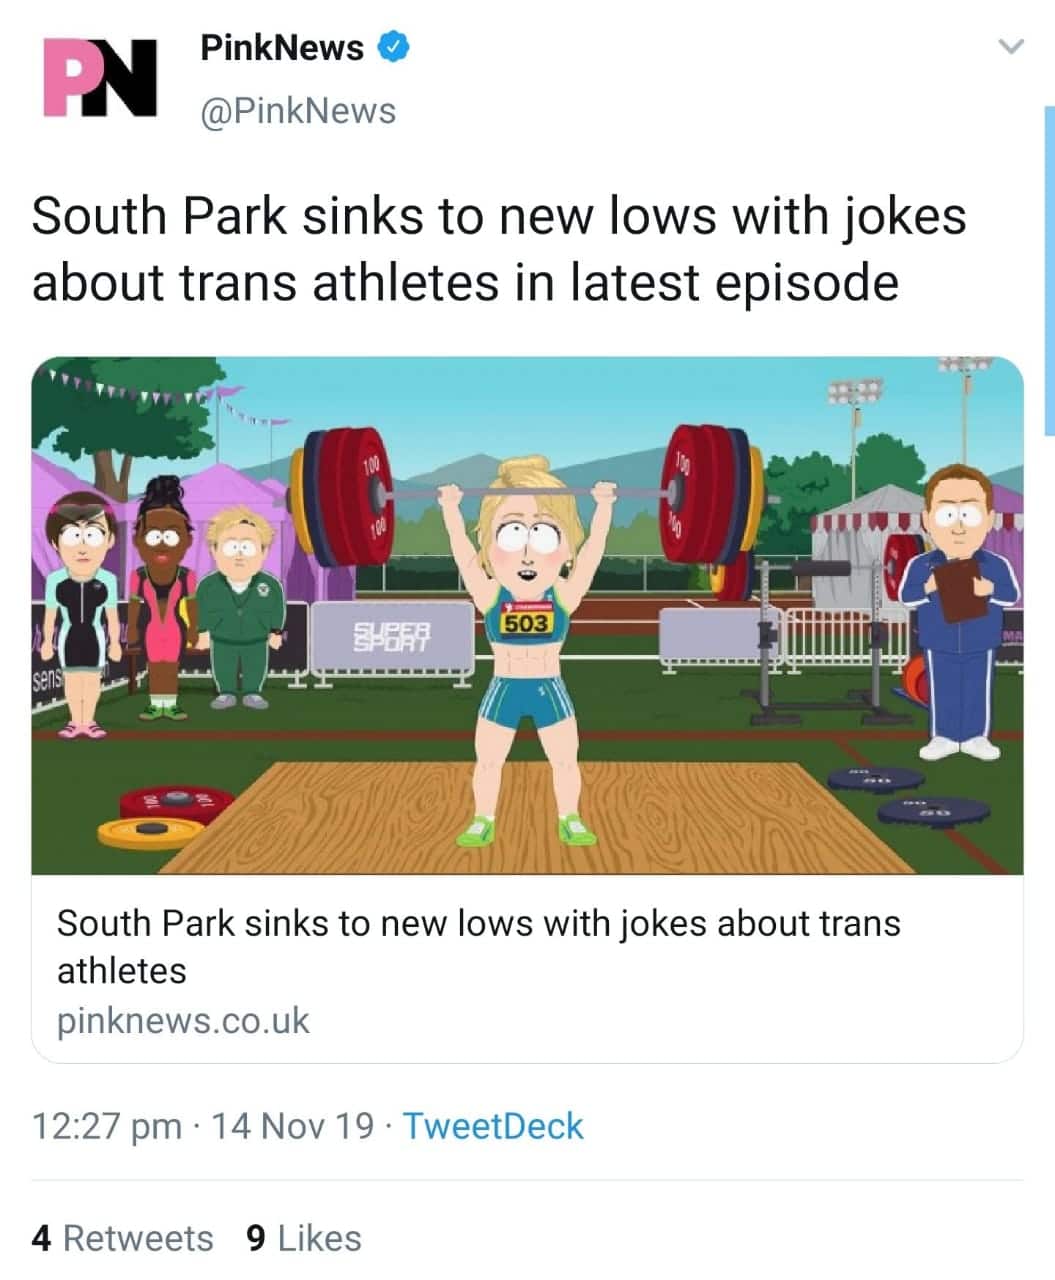 nsfw offensive-memes nsfw text: PinkNews @PinkNews South Park sinks to new lows with jokes about trans athletes in latest episode 03 South Park sinks to new lows with jokes about trans athletes pinknews.co.uk 12:27 pm • 14 Nov 19 • TweetDeck 9 Likes 